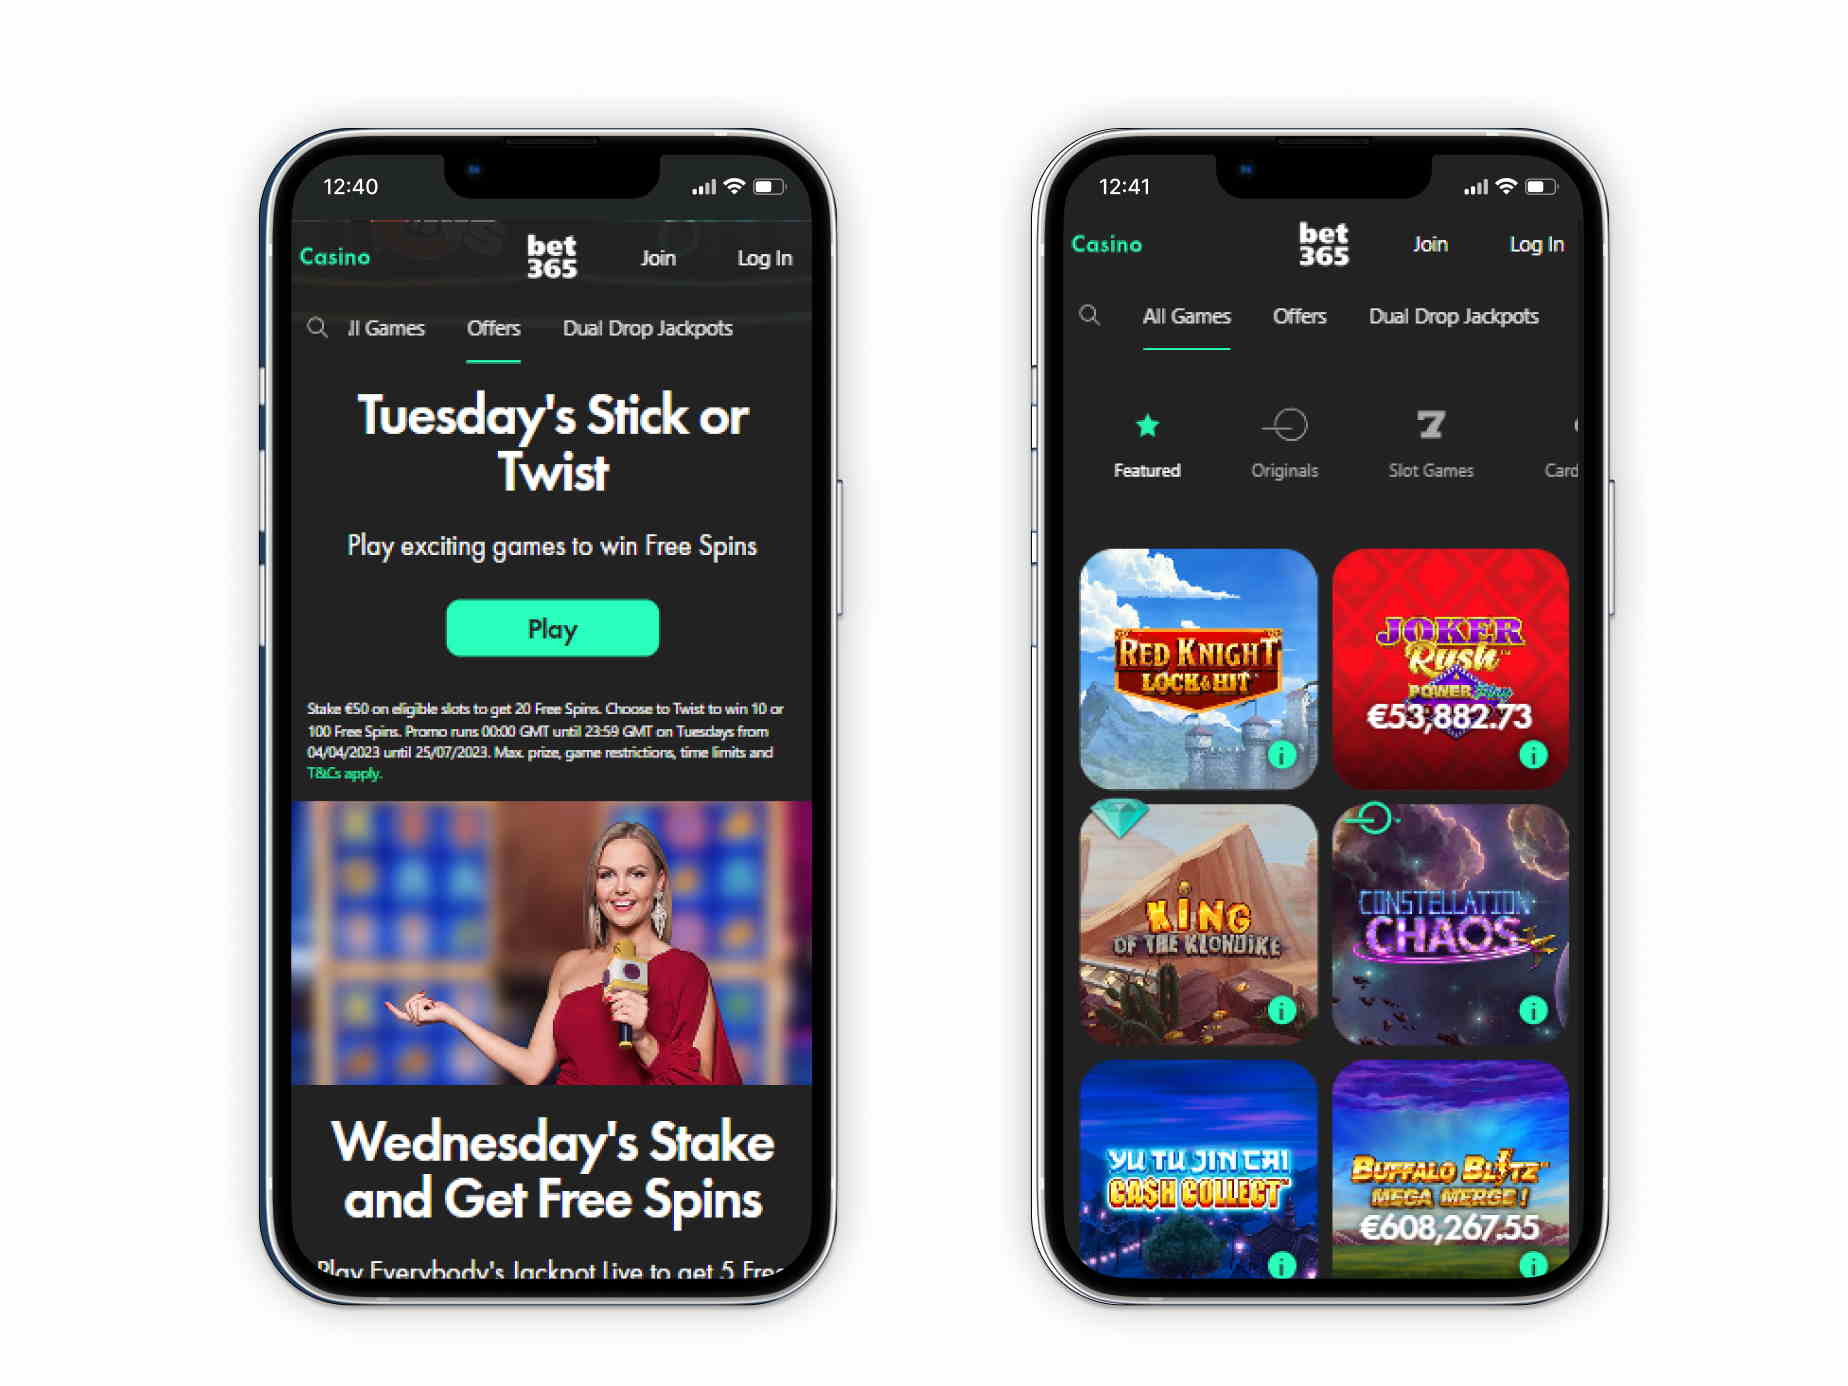 Bet365 Tuesday Stick or Twist - Get up to 100 Free Spins